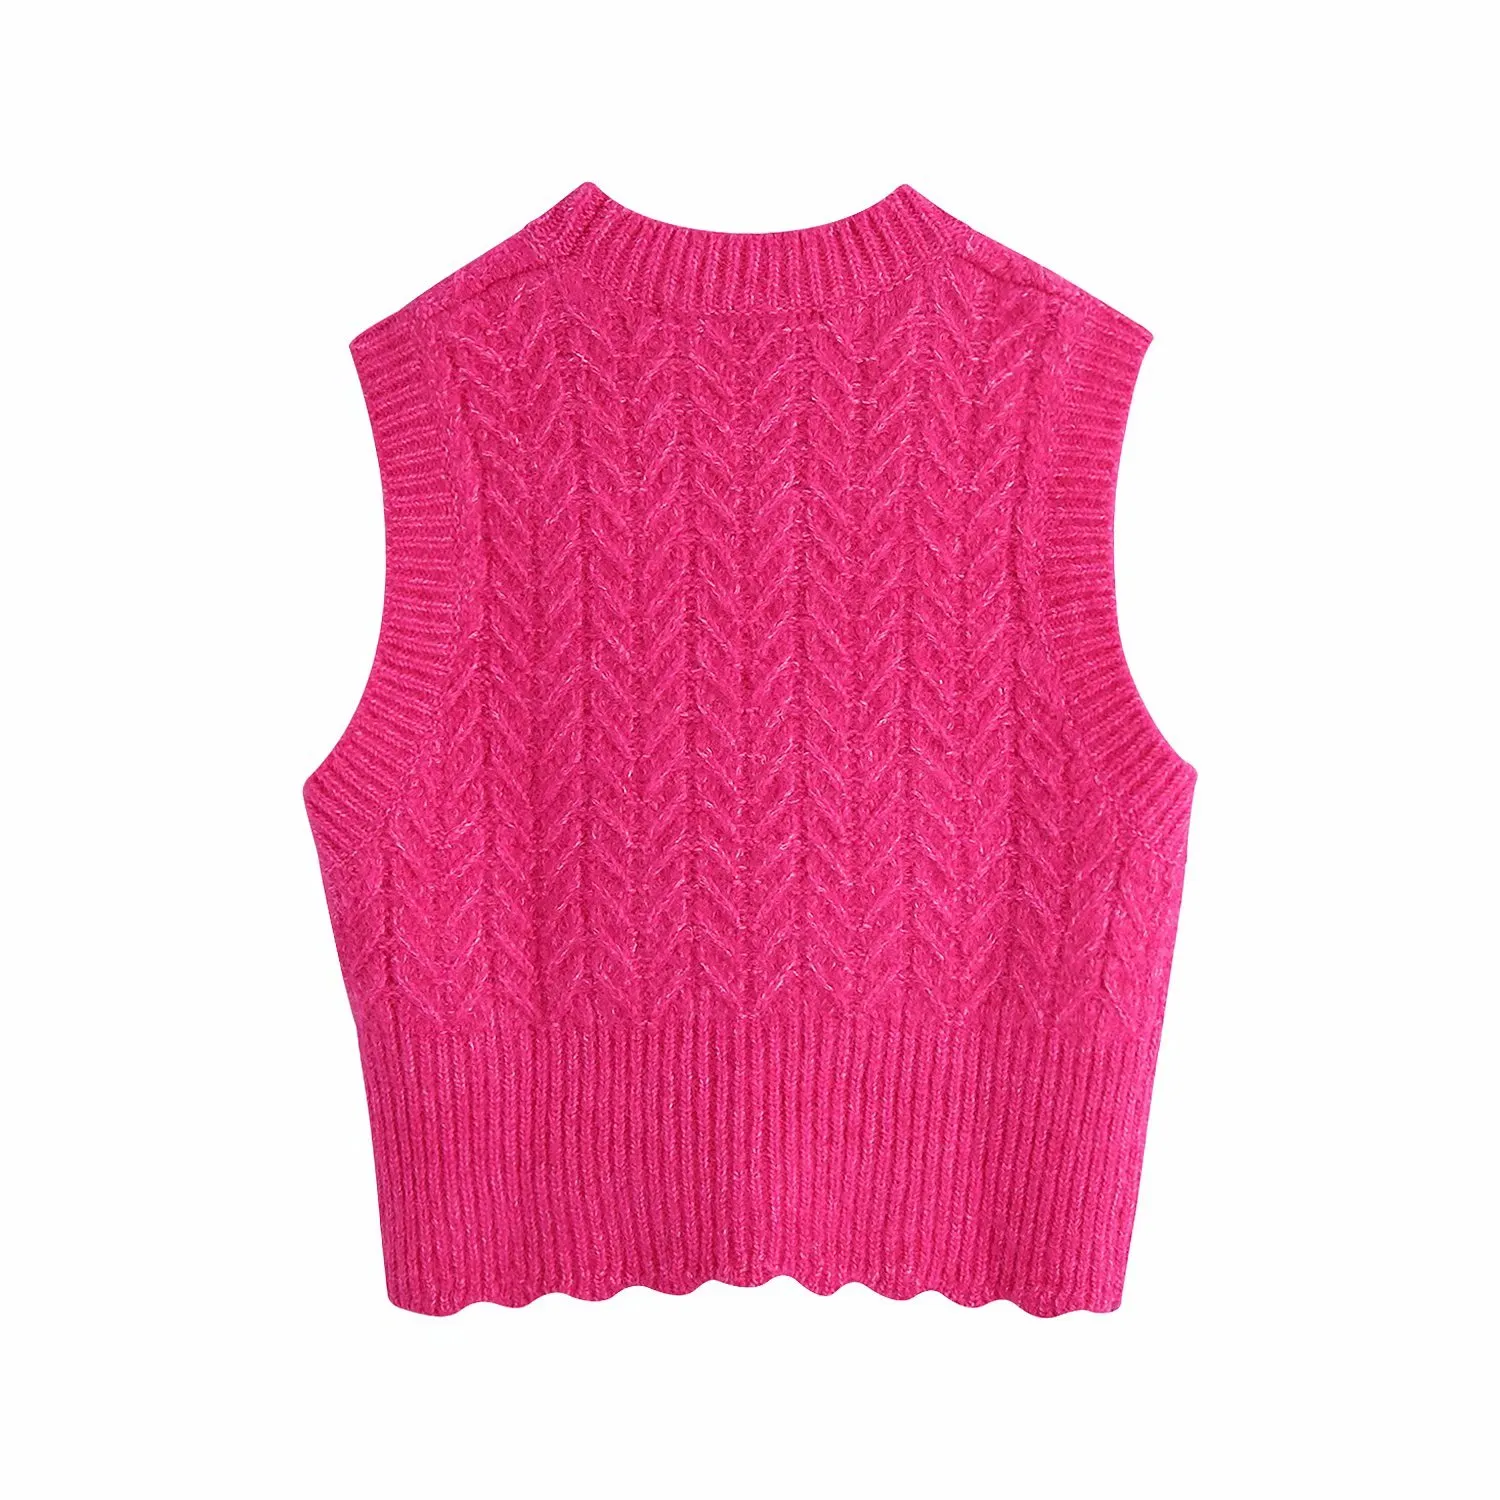 Femmes Solid Color Crochet Casual Slim Court Tricot Gilet Pull Femme Chic O Cou Sans Manches Gilet Tops SW697 210416